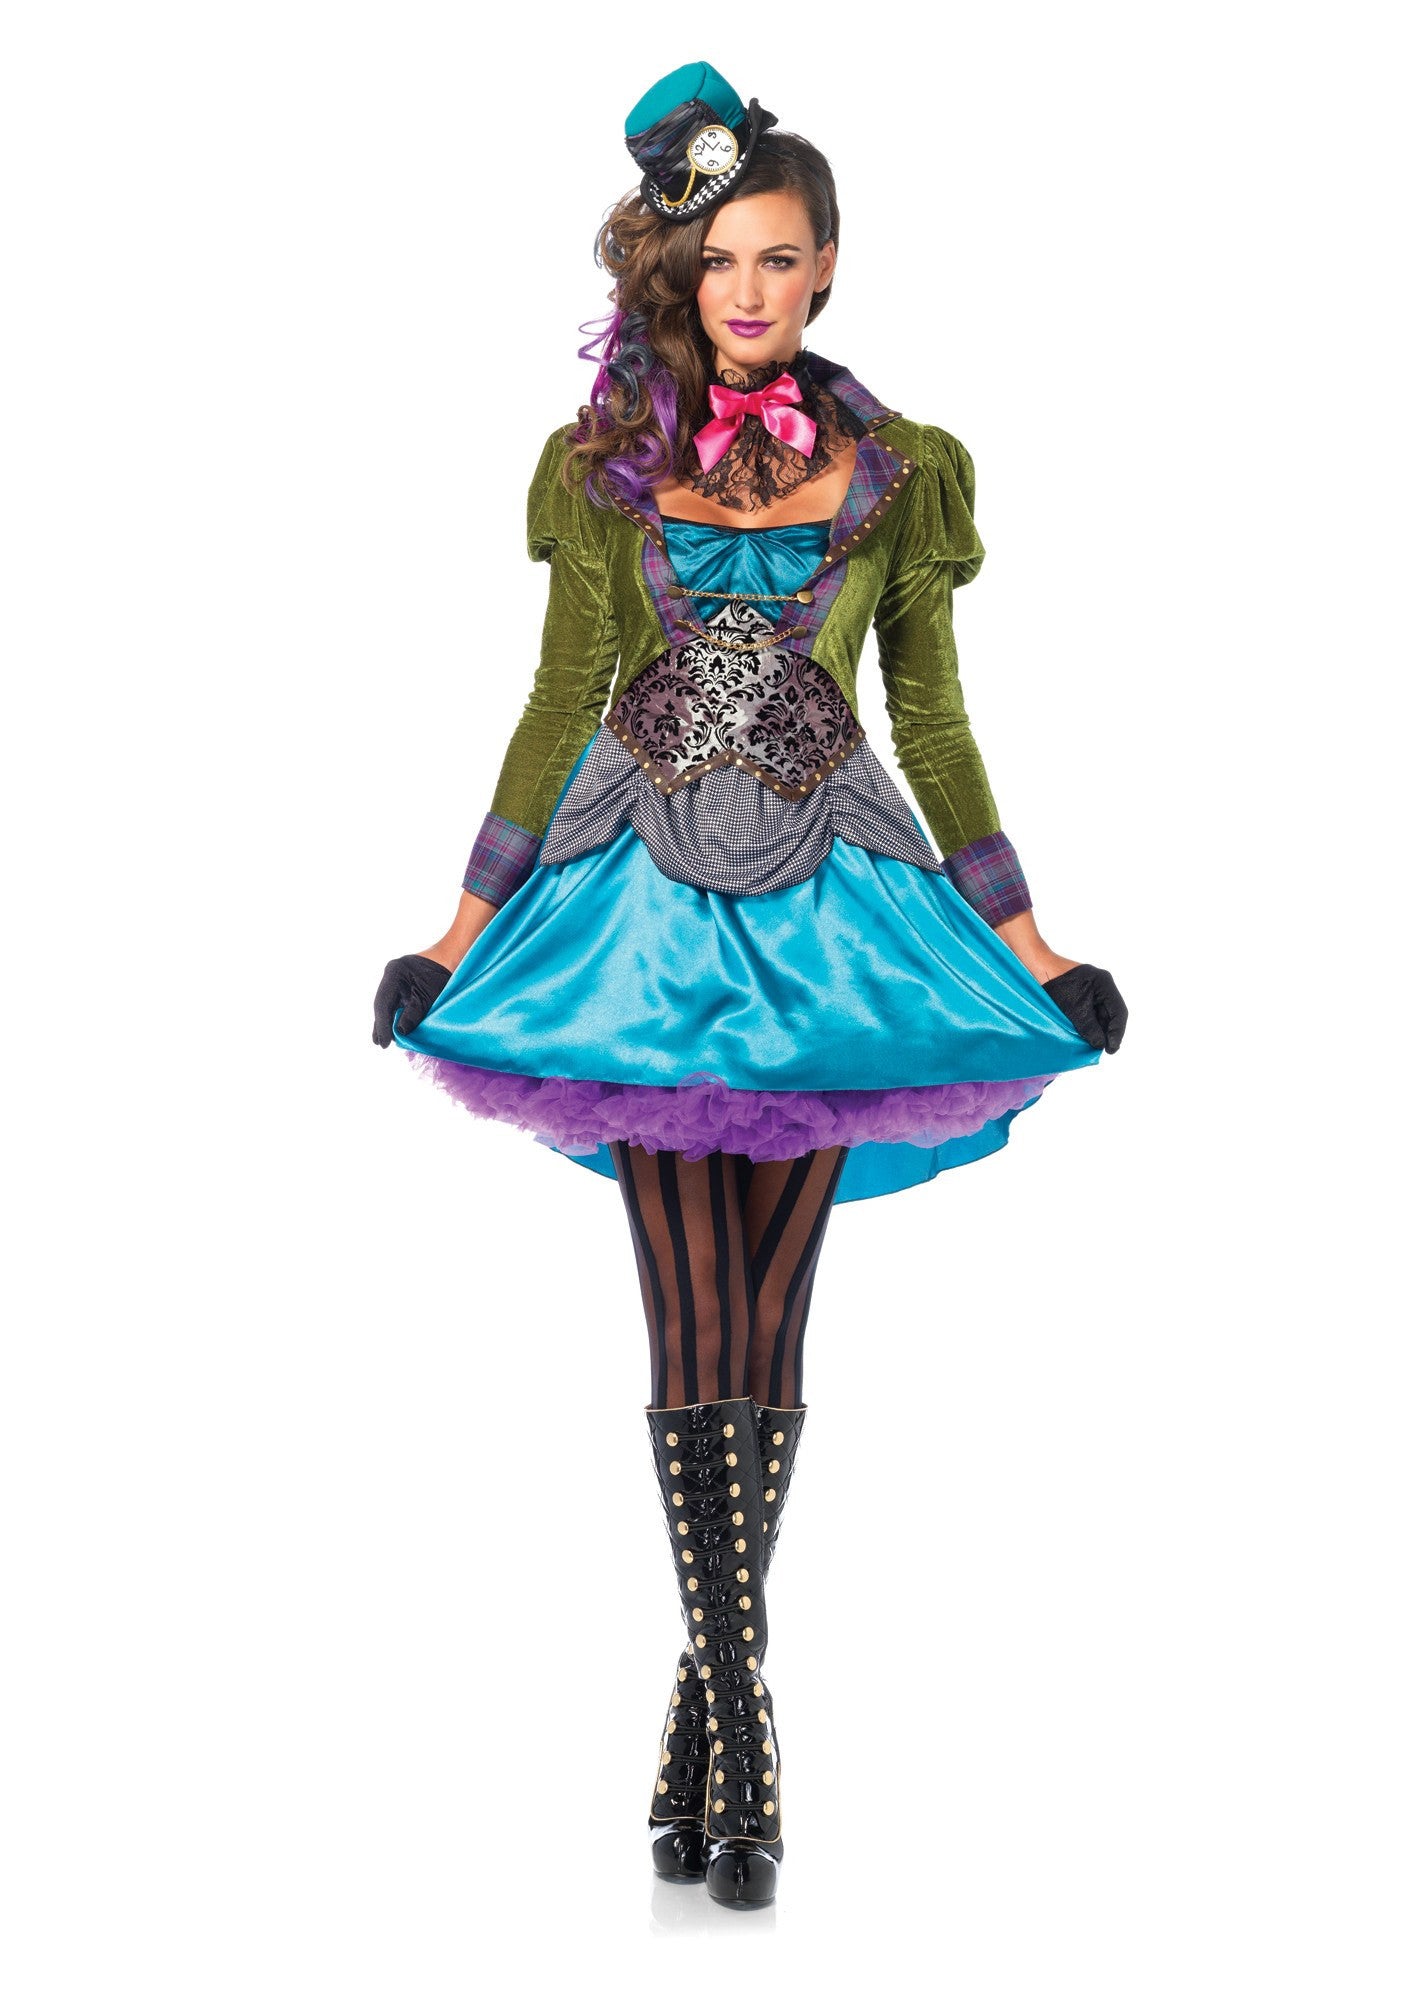 Costume - Deluxe Mad Hatter Costume